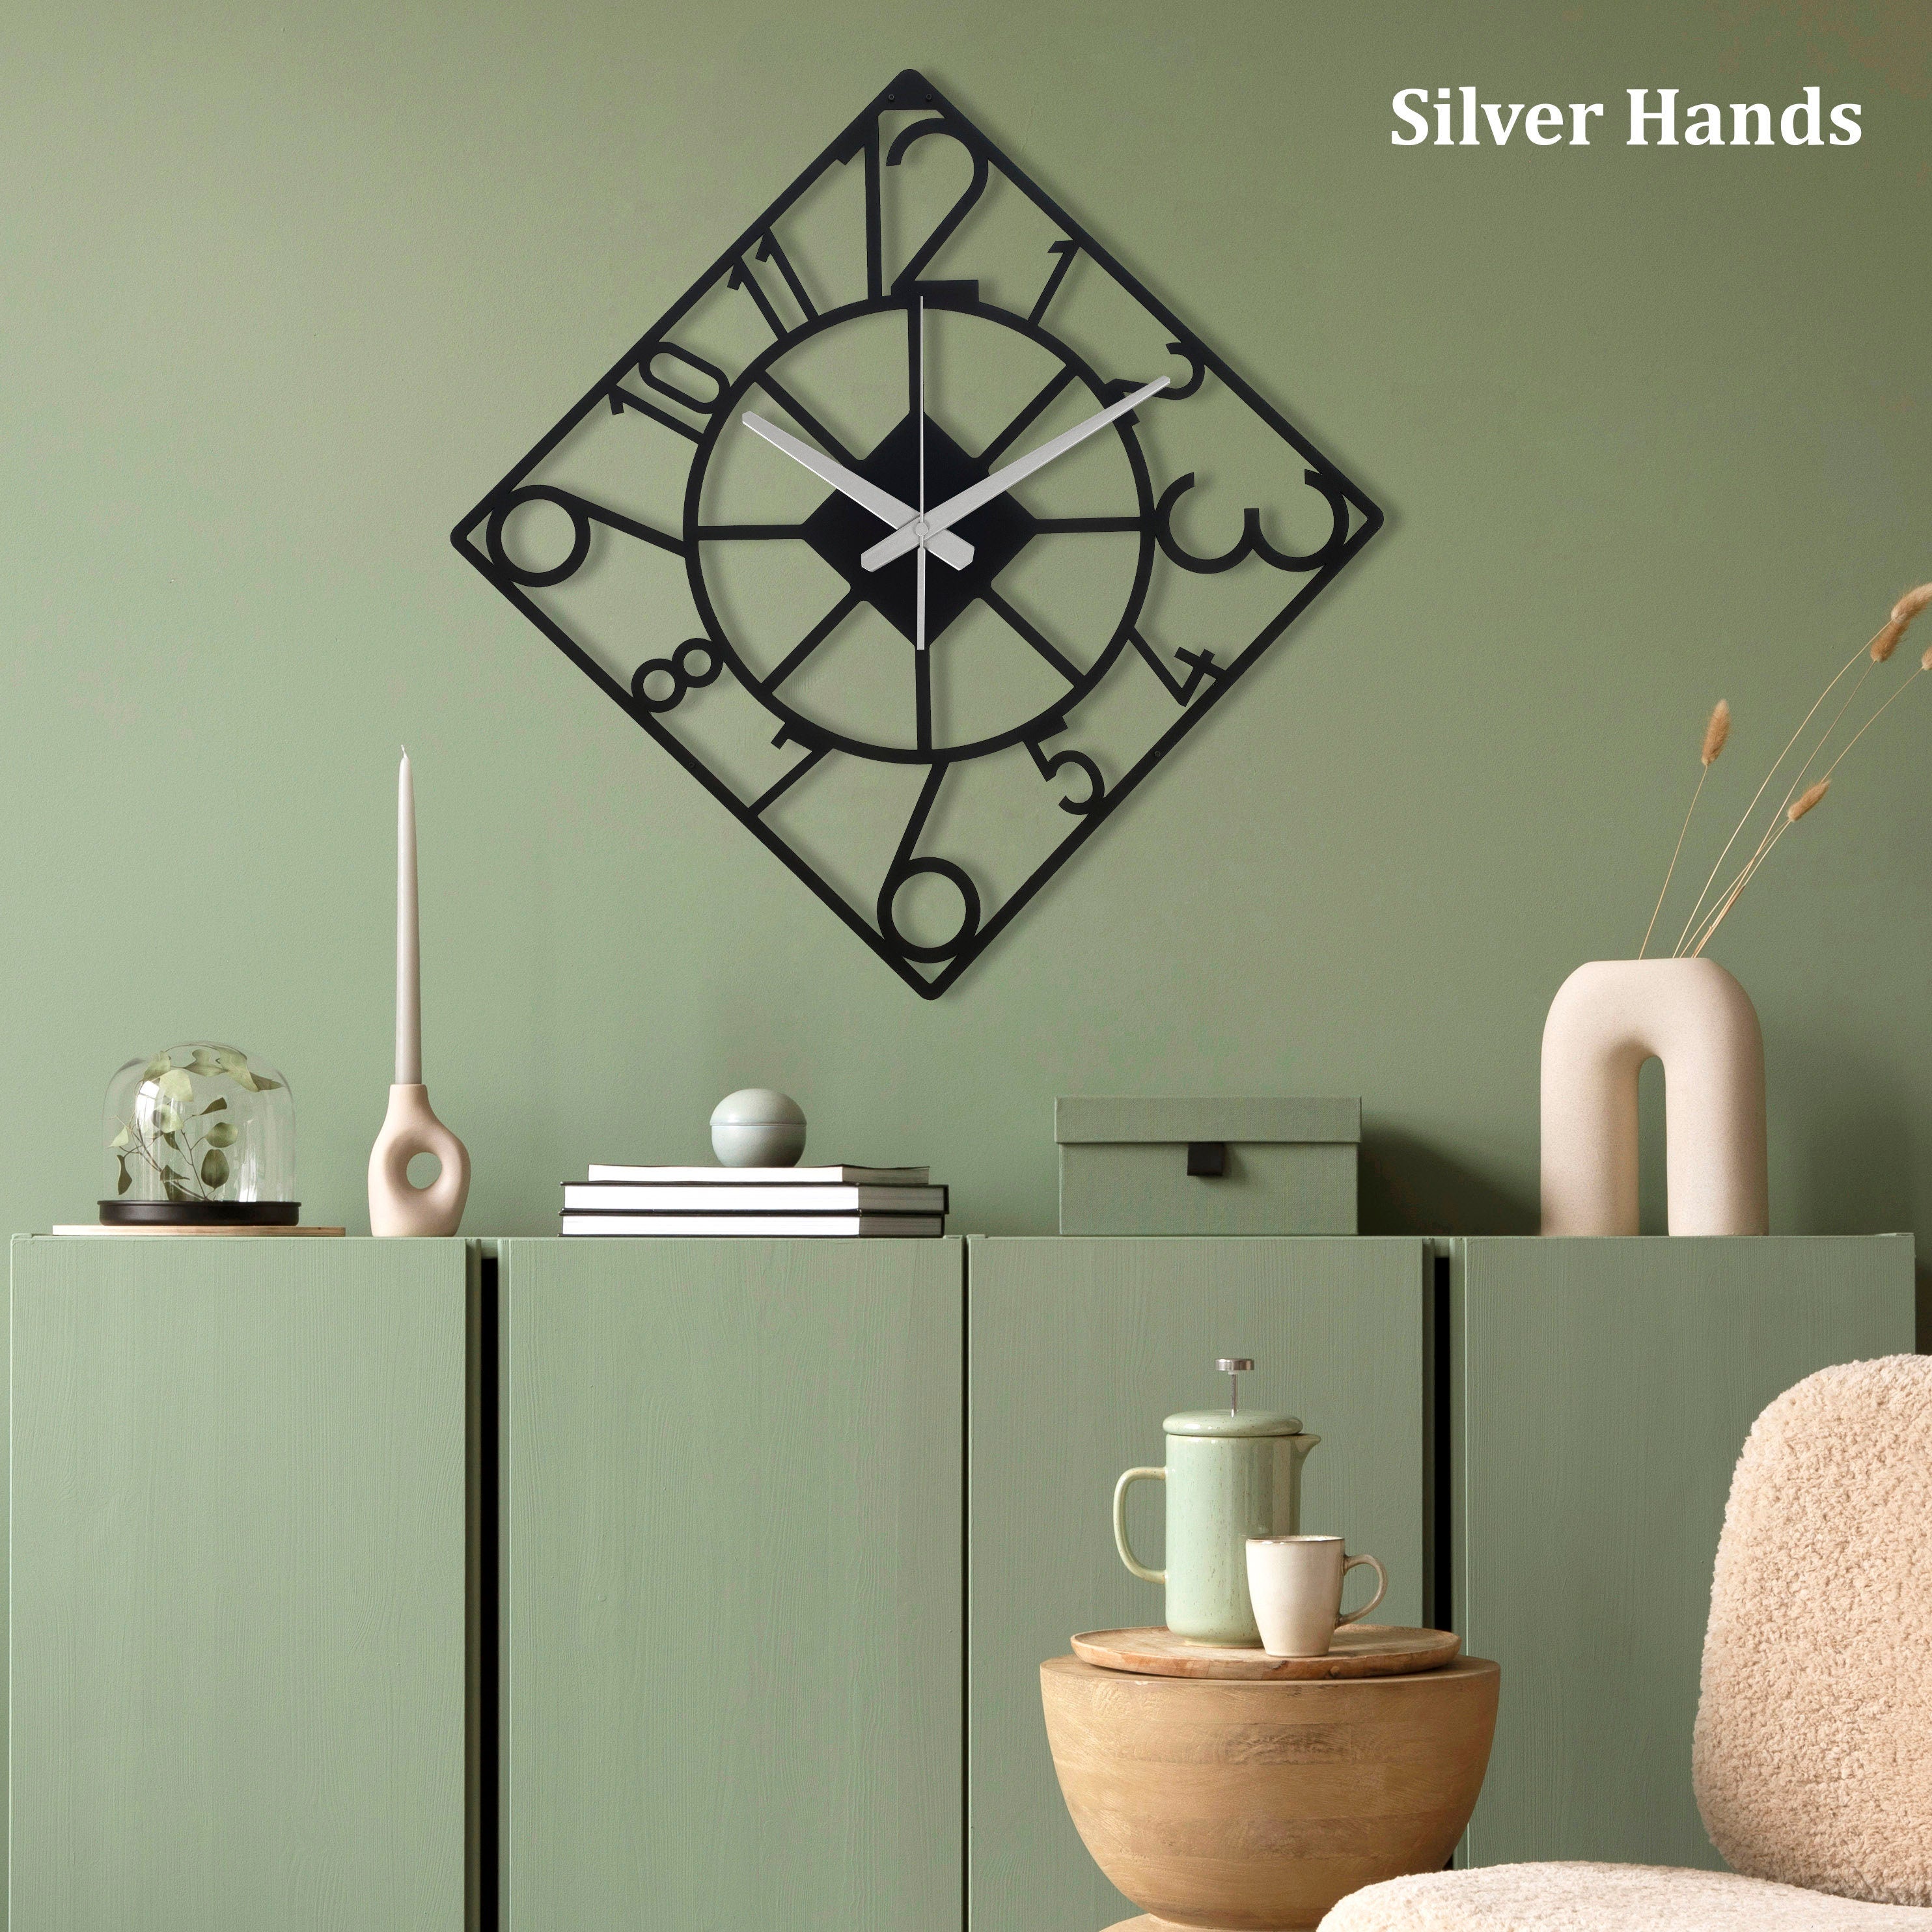 Square Wall Clock, Modern Wall Clock, Home Decor And Gifts, Unique Wall Clock, Metal Wall Clock, Outdoor Clock With Numbers, Laser Cut Clock